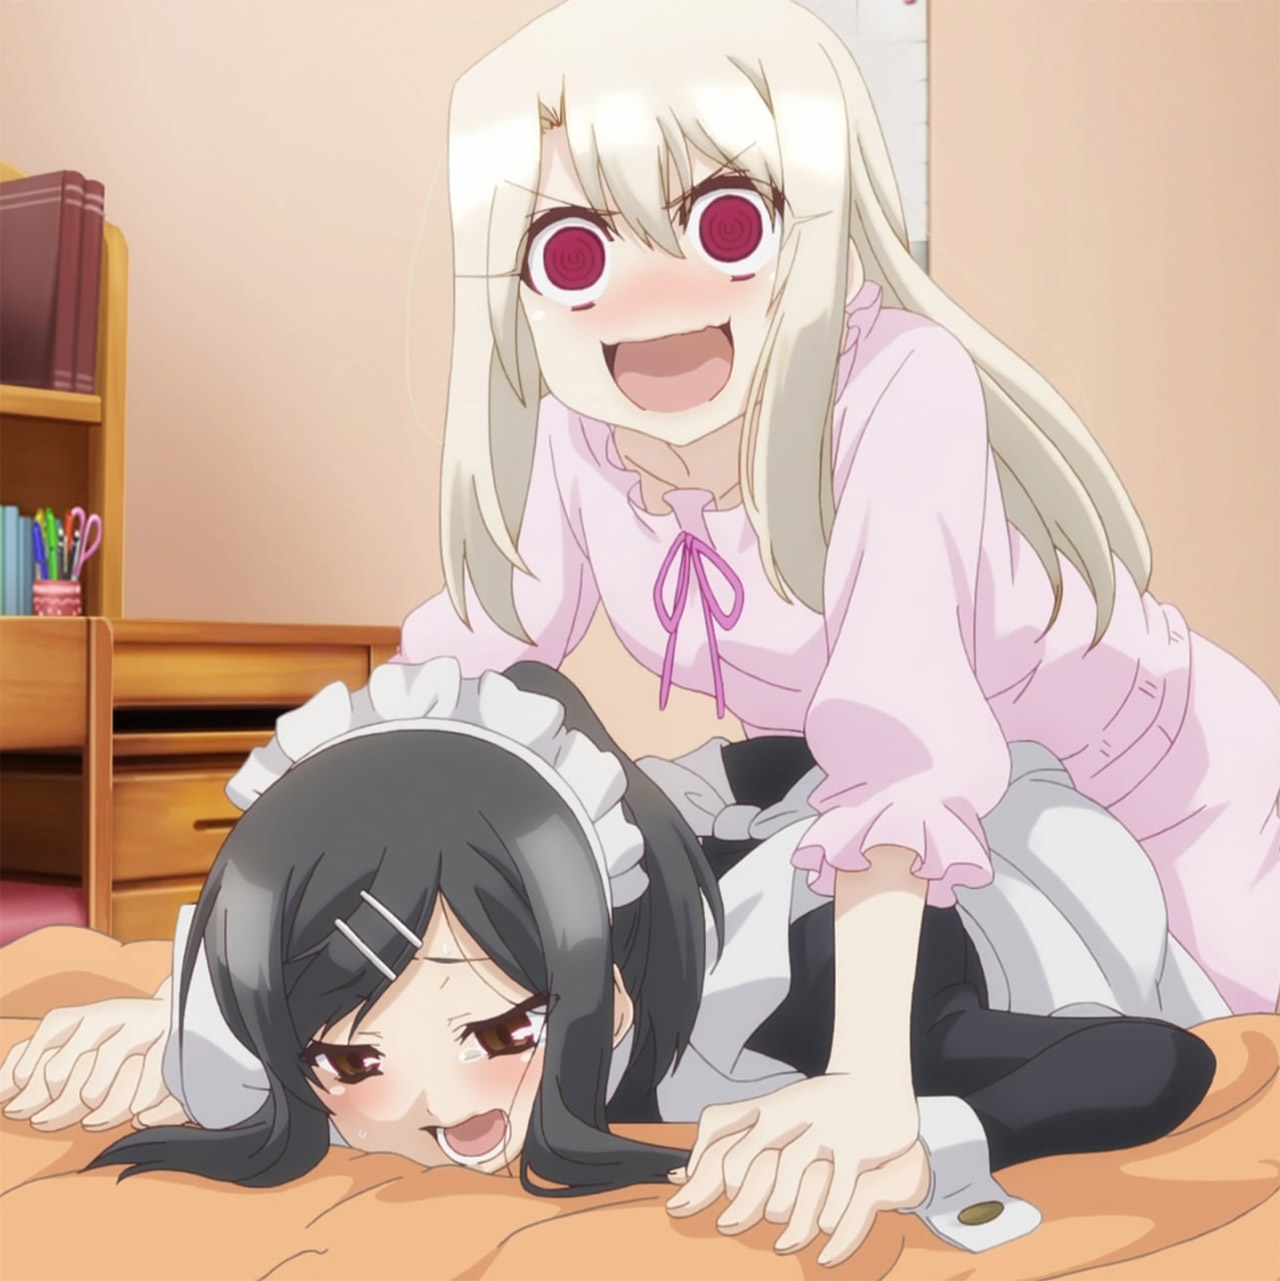 Illya+mentioned+swell+with+loli+yuri+inc